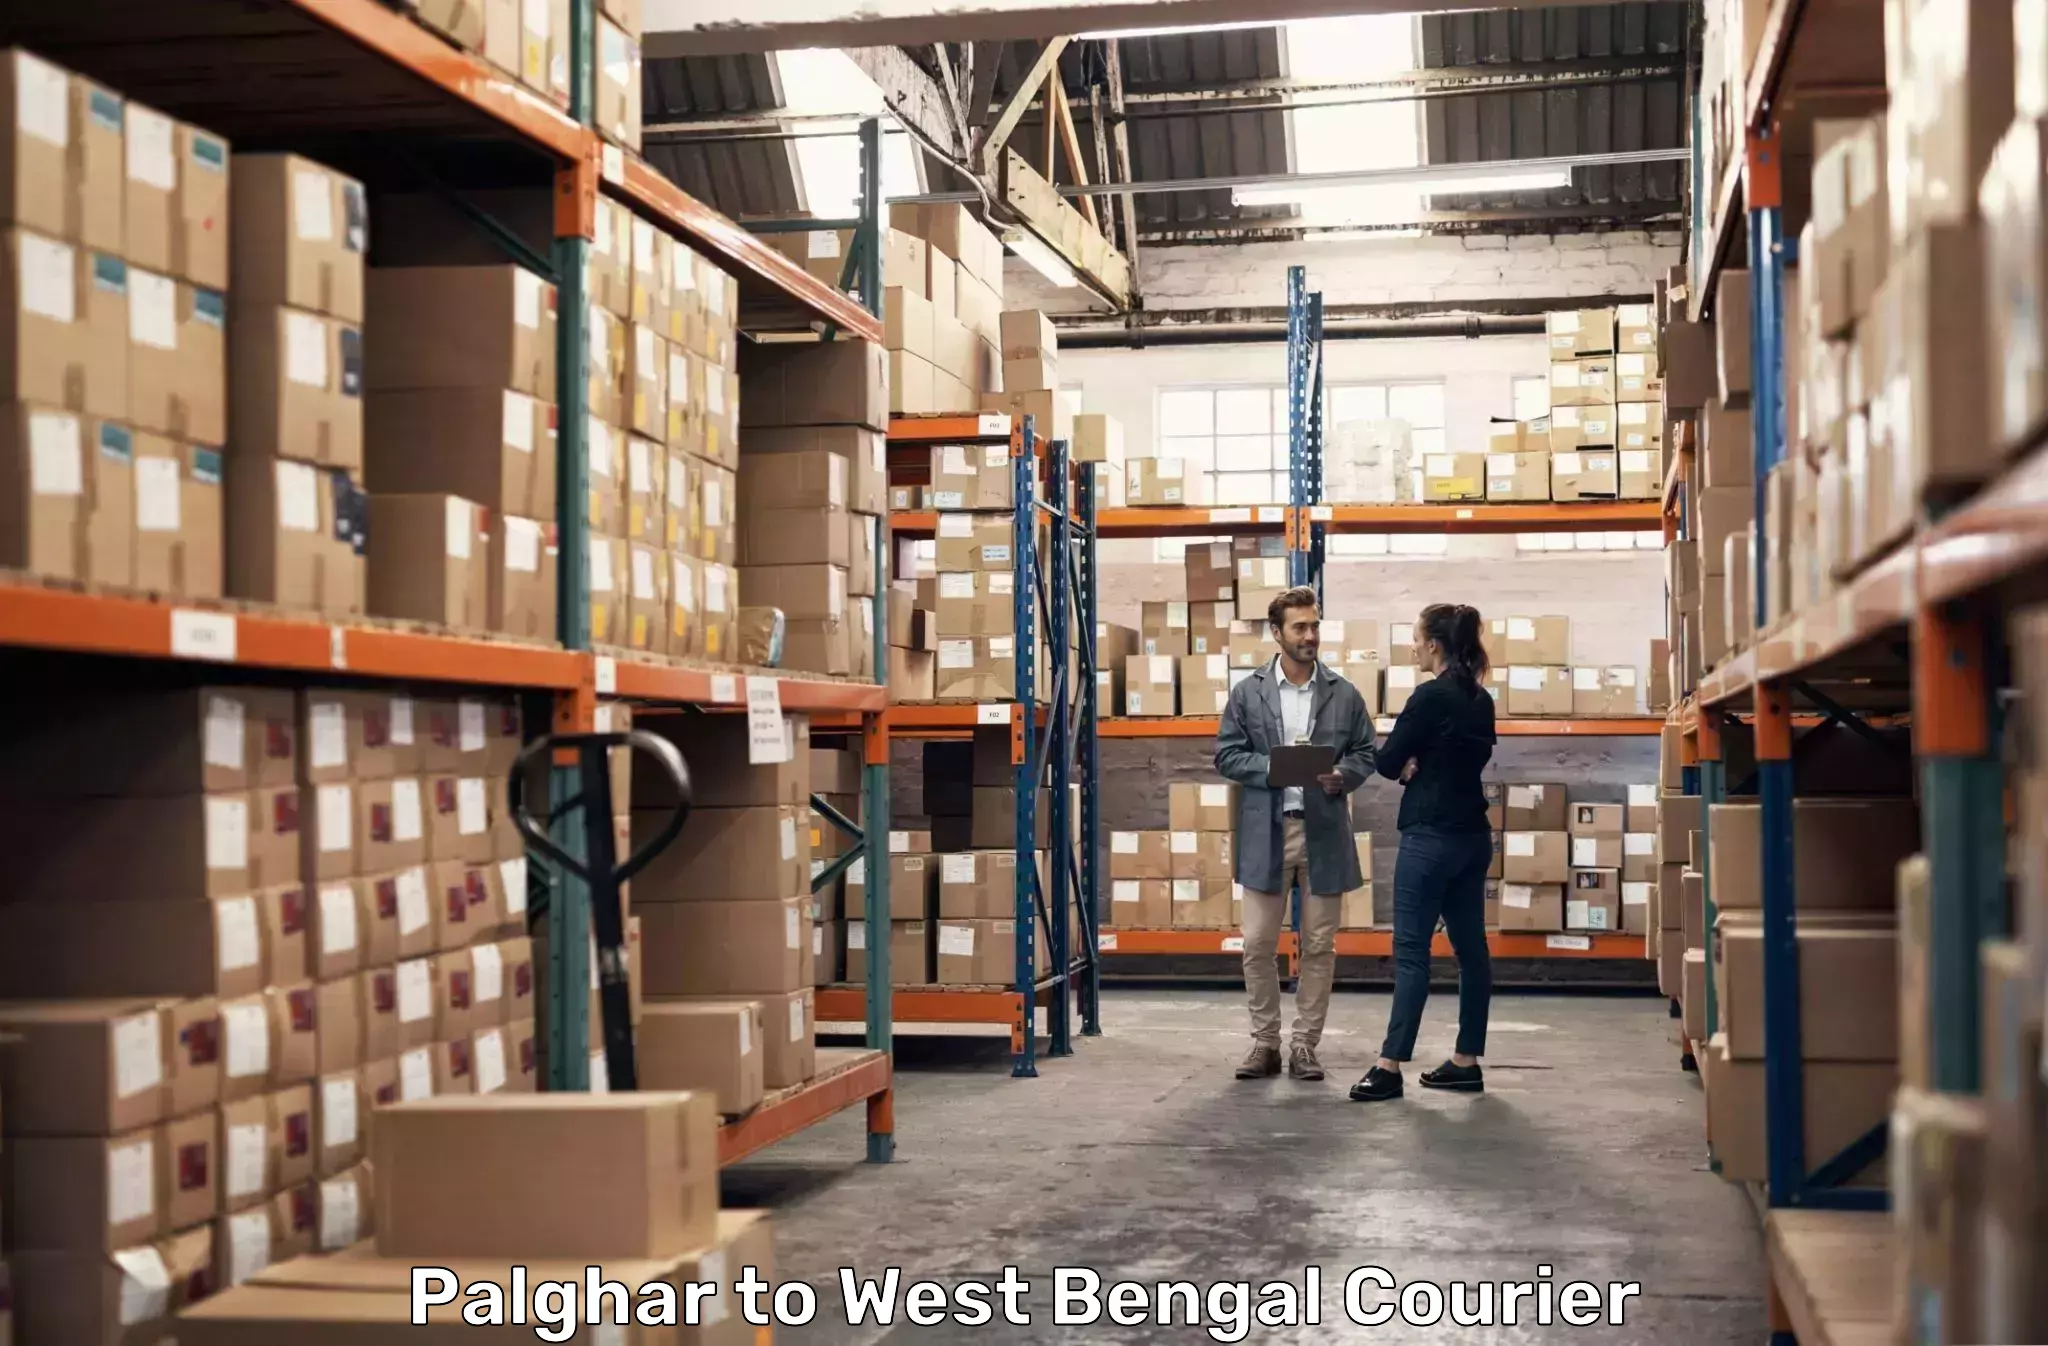 Global shipping networks Palghar to West Bengal